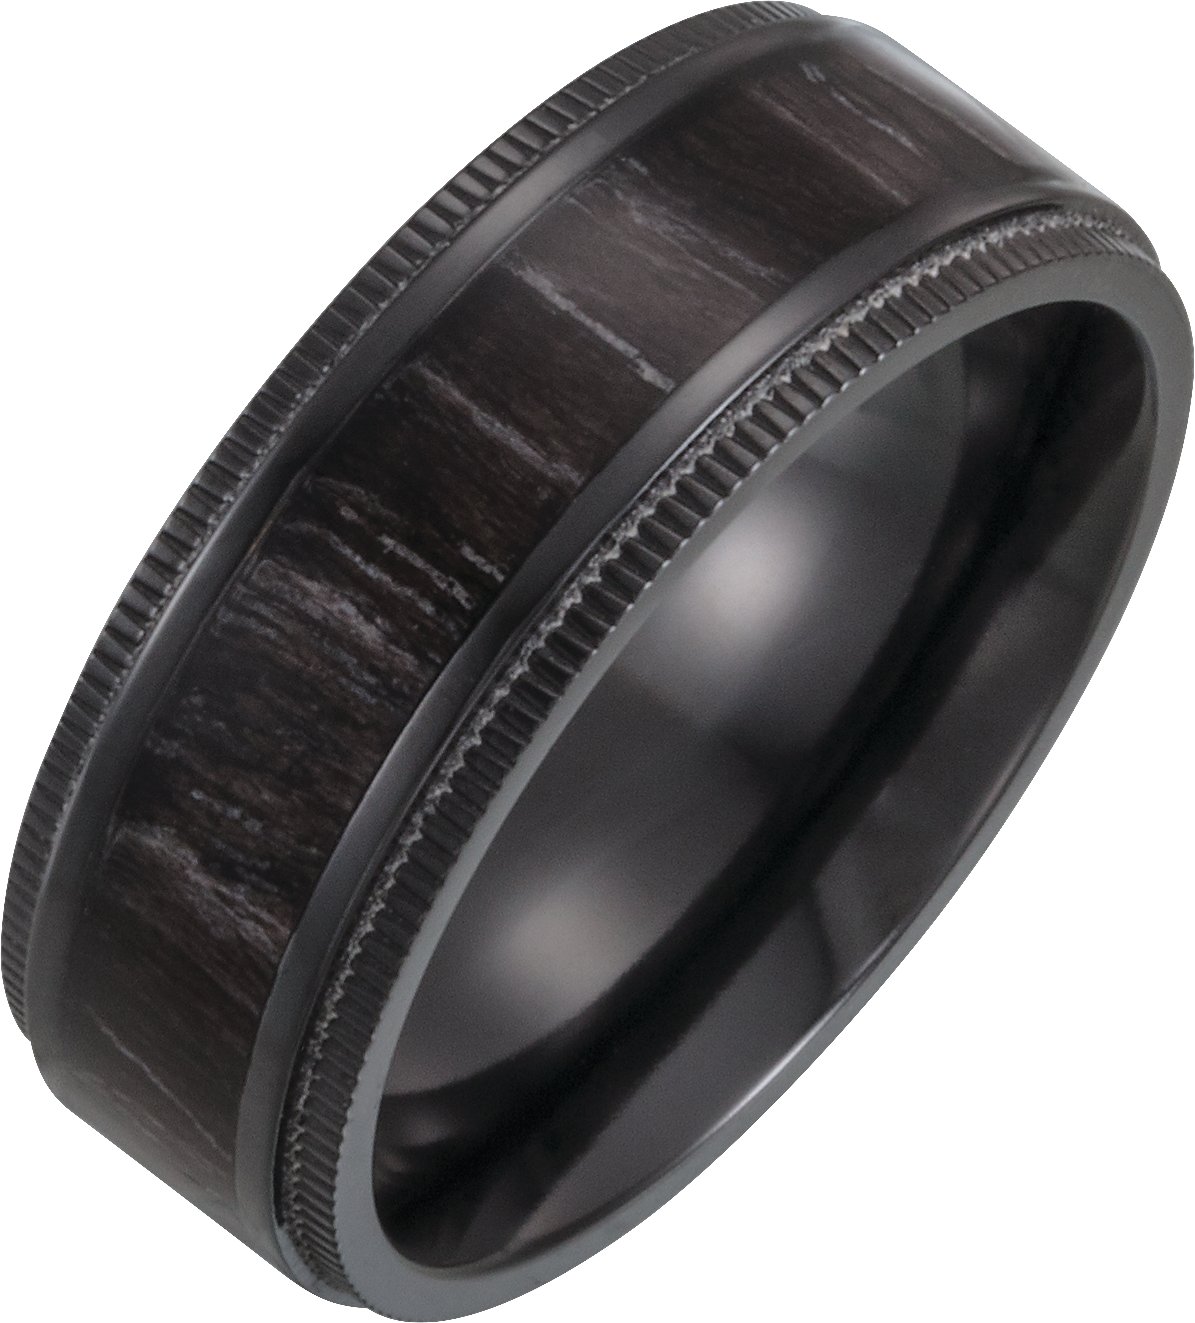 Black Titanium 8 mm Coin-Edge Band with Wood Inlay Size 12